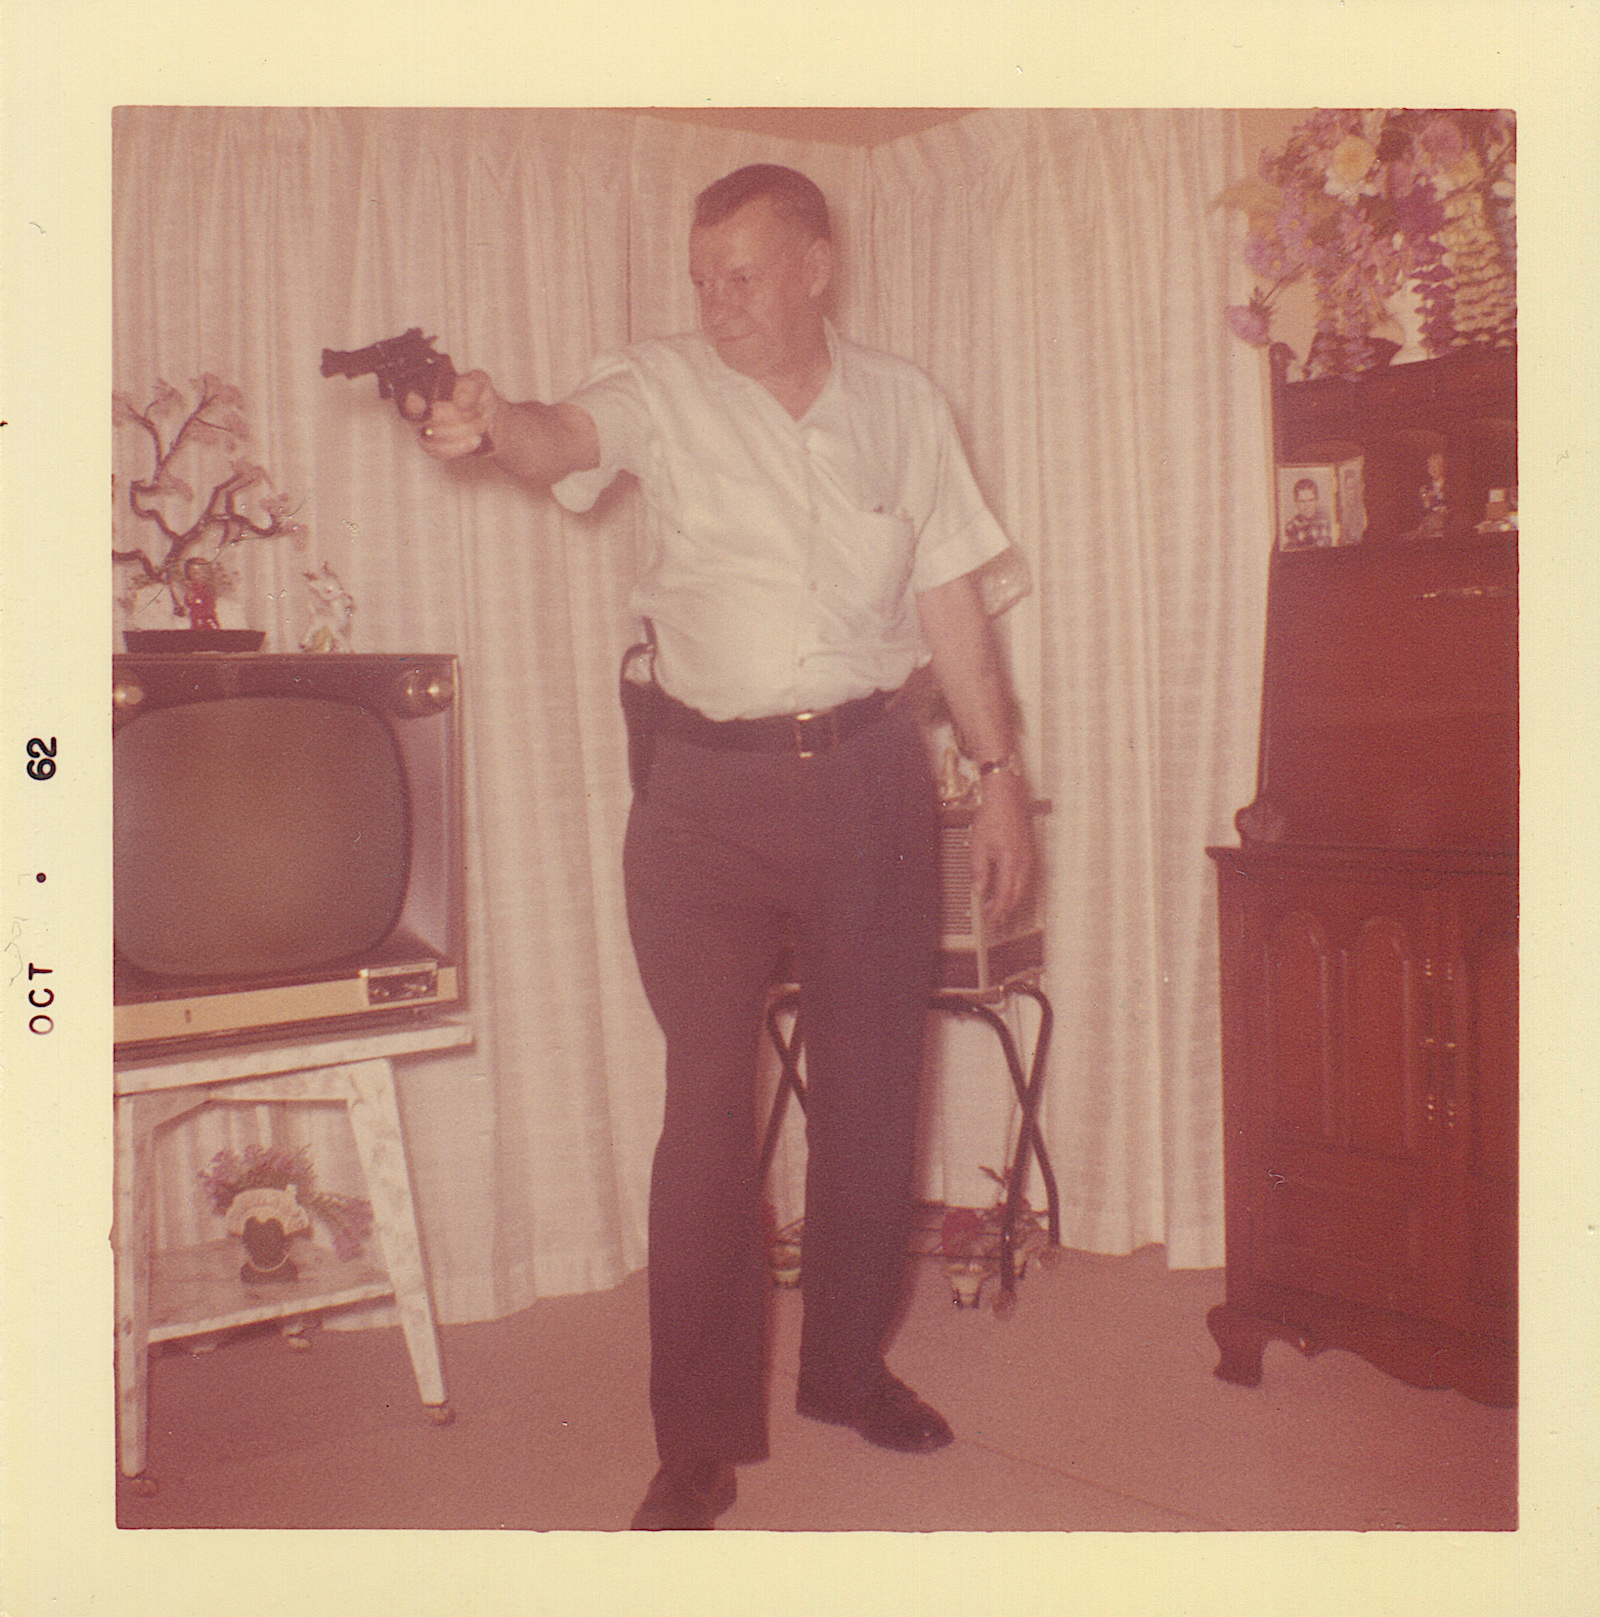 Man with pistol in front of a TV set